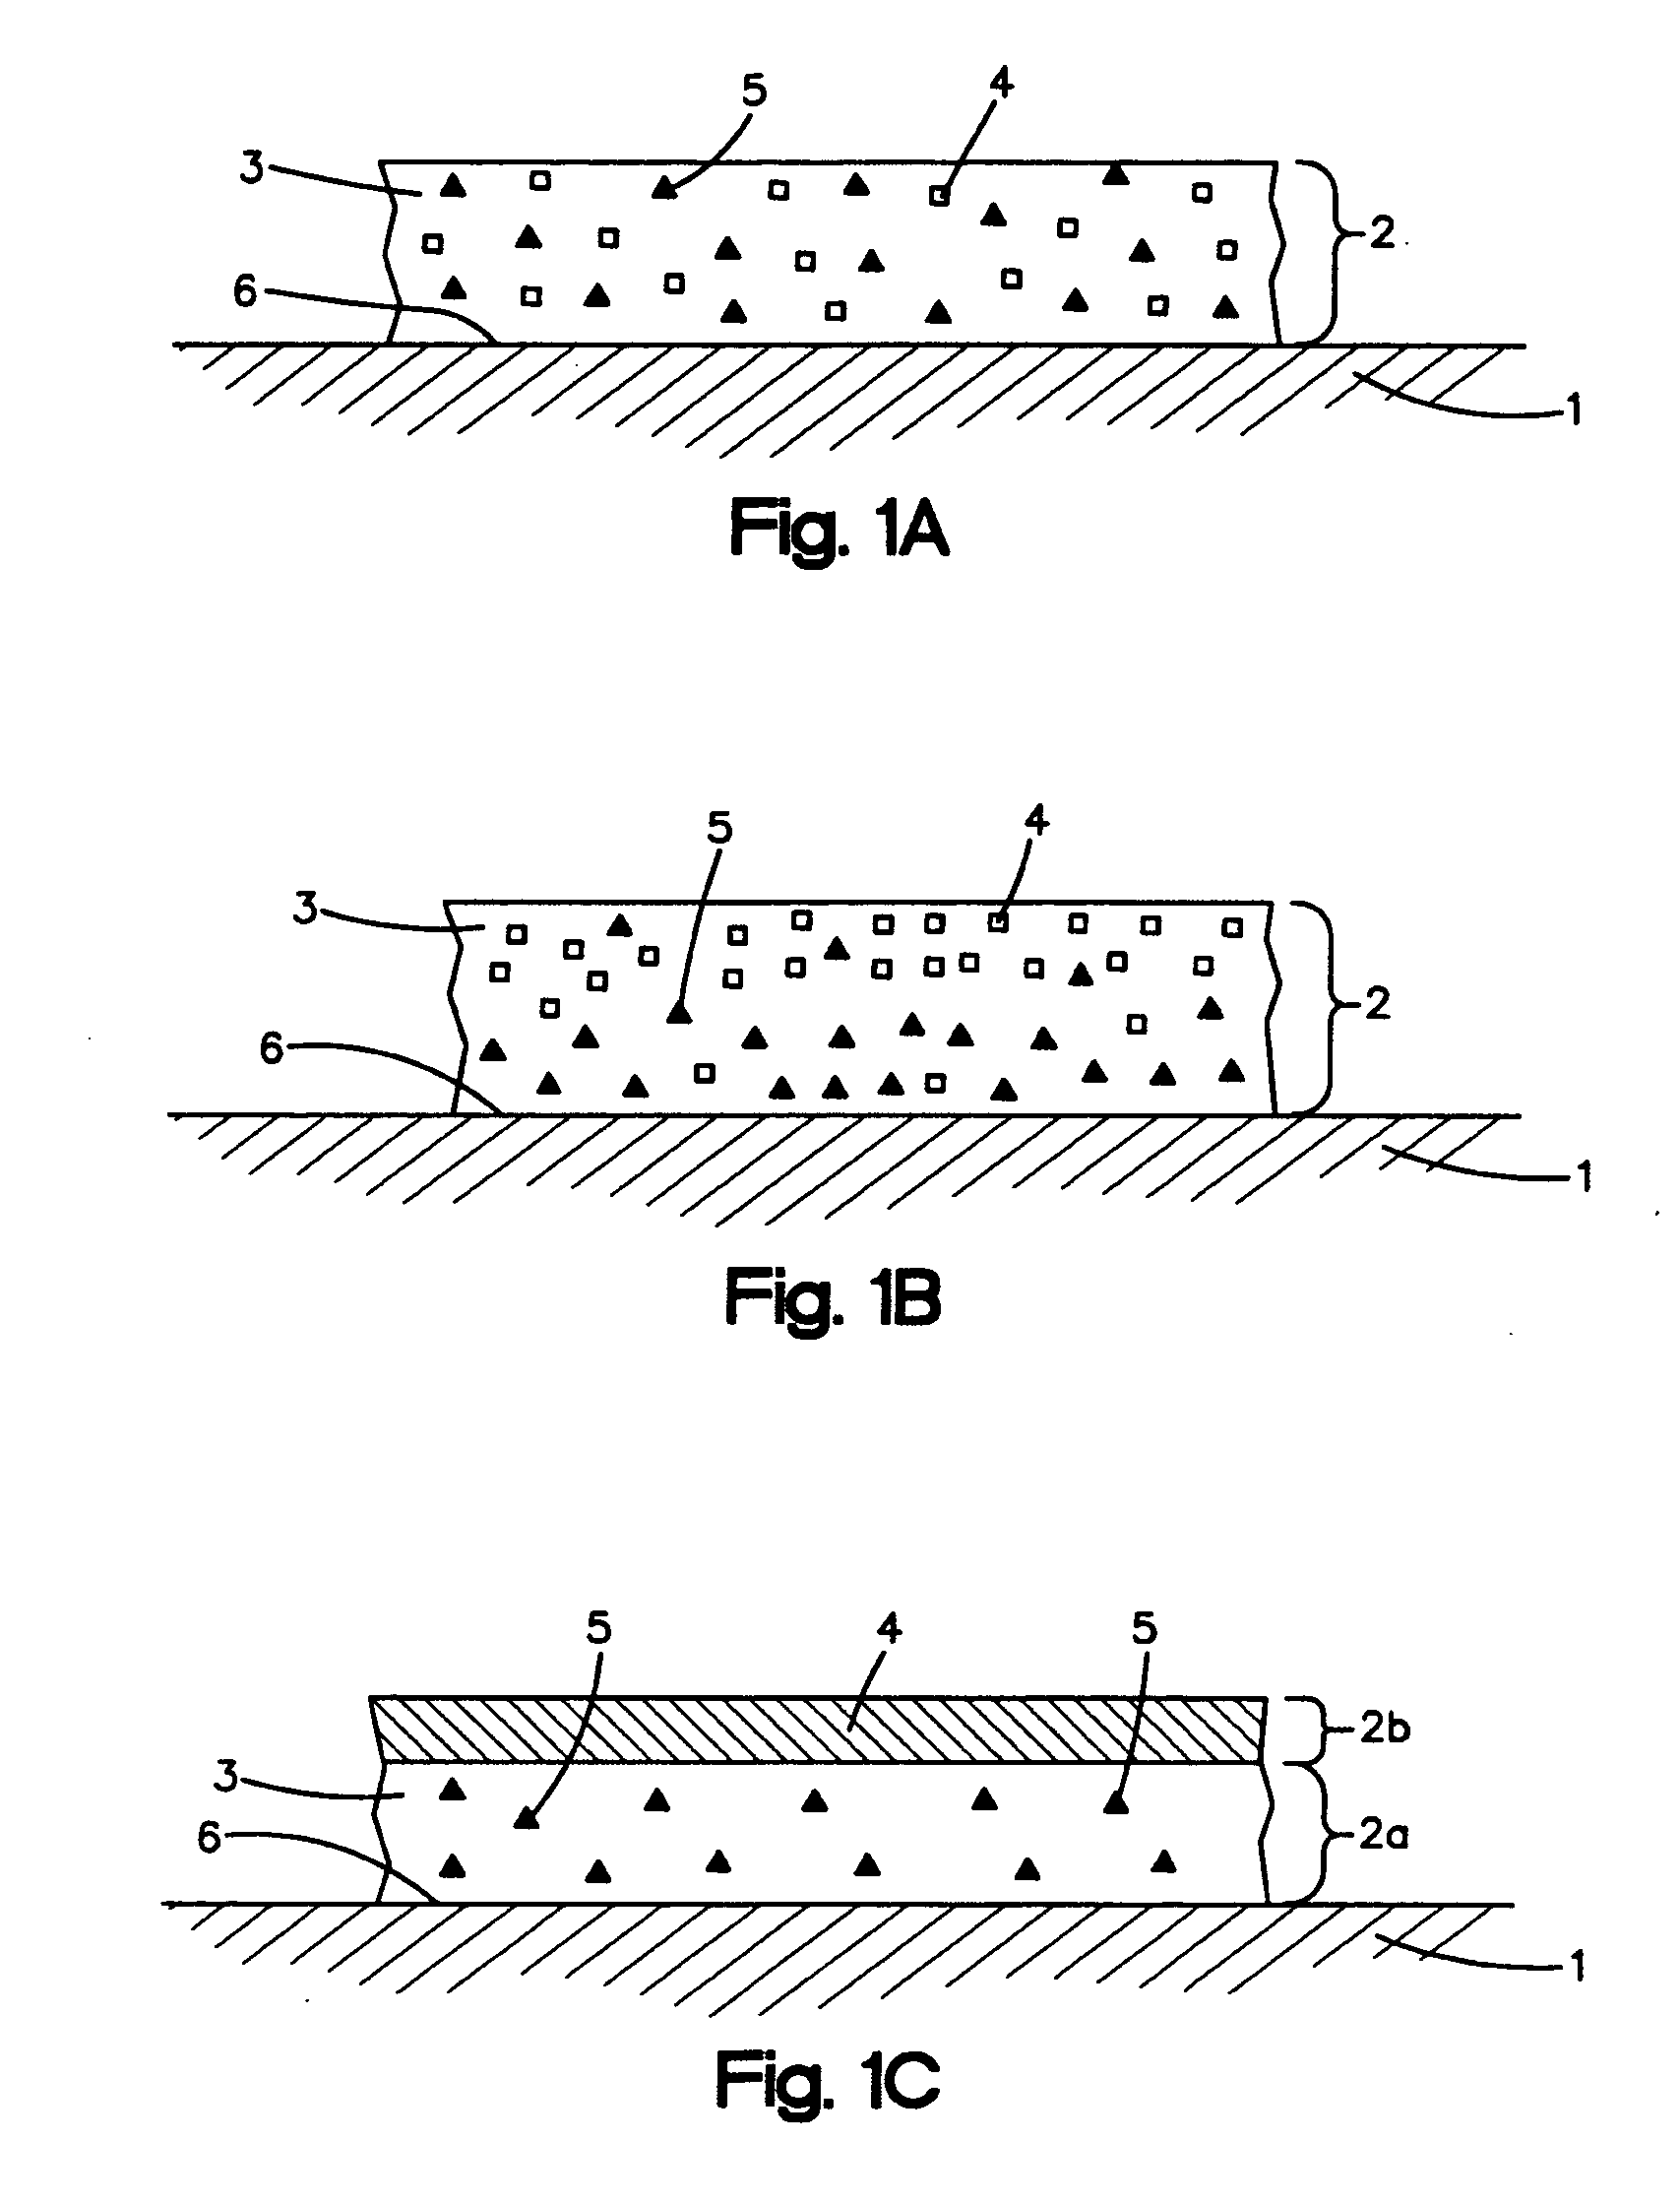 Anti-adhesion agents for drug coatings